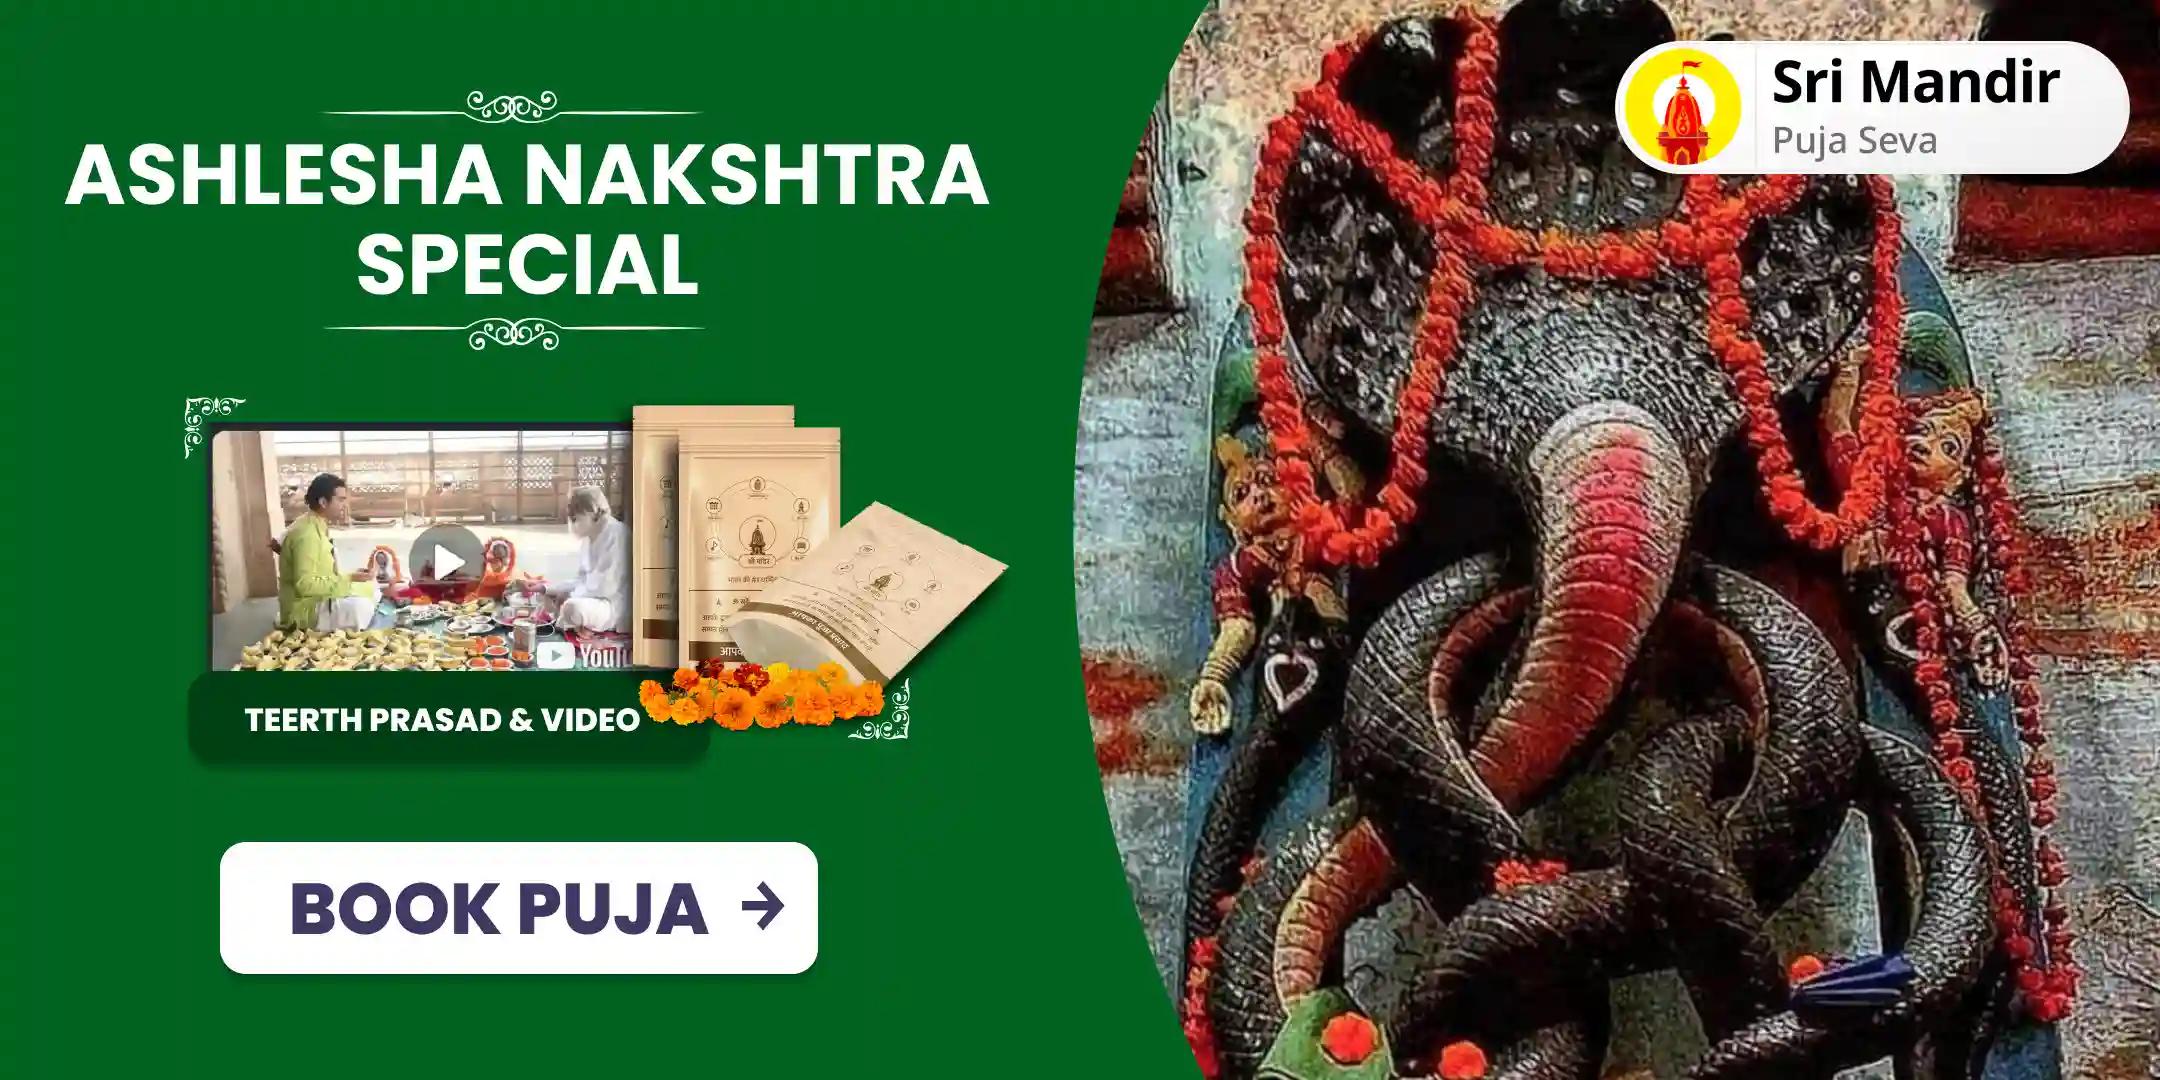 Ashlesha Nakshtra Special Kaal Sarp Dosha Shanti Mahapuja and Rudrabhishek for Protection from Accidents and to Attain Stability